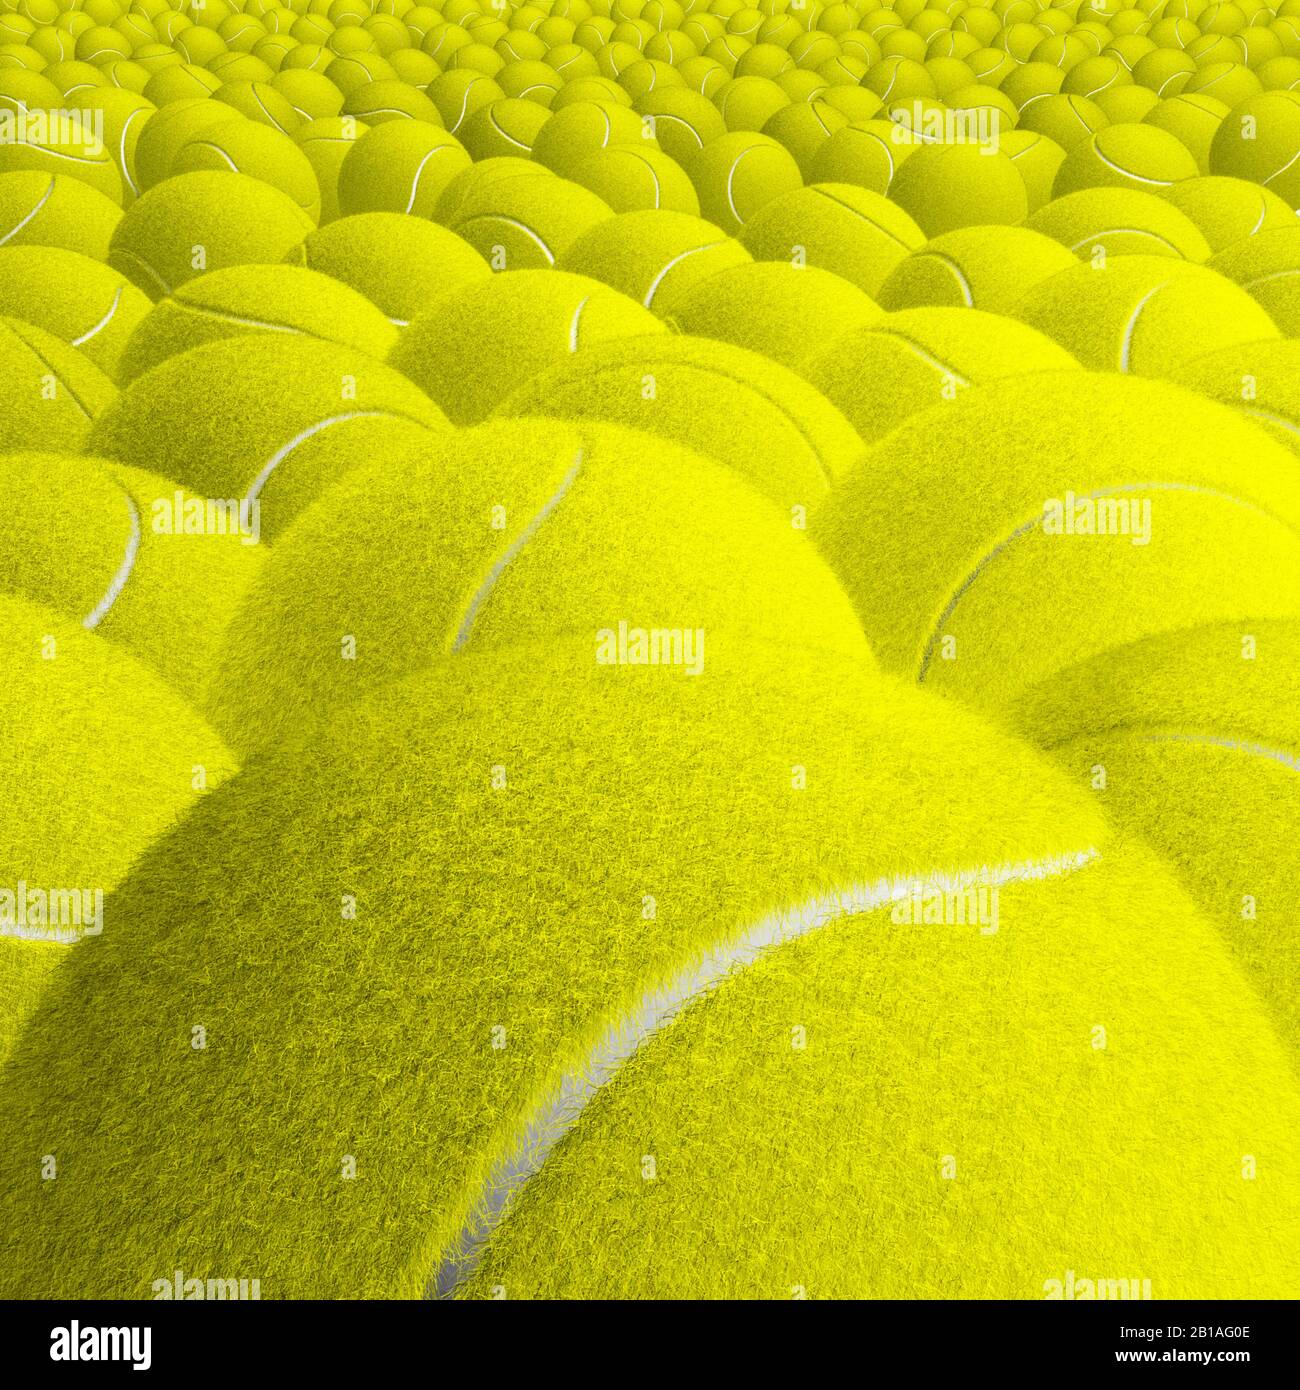 Tennis ball close up. Balls stretching into the distance. Clean and new. Fur texture. full frame. Studio shot. Stock Photo